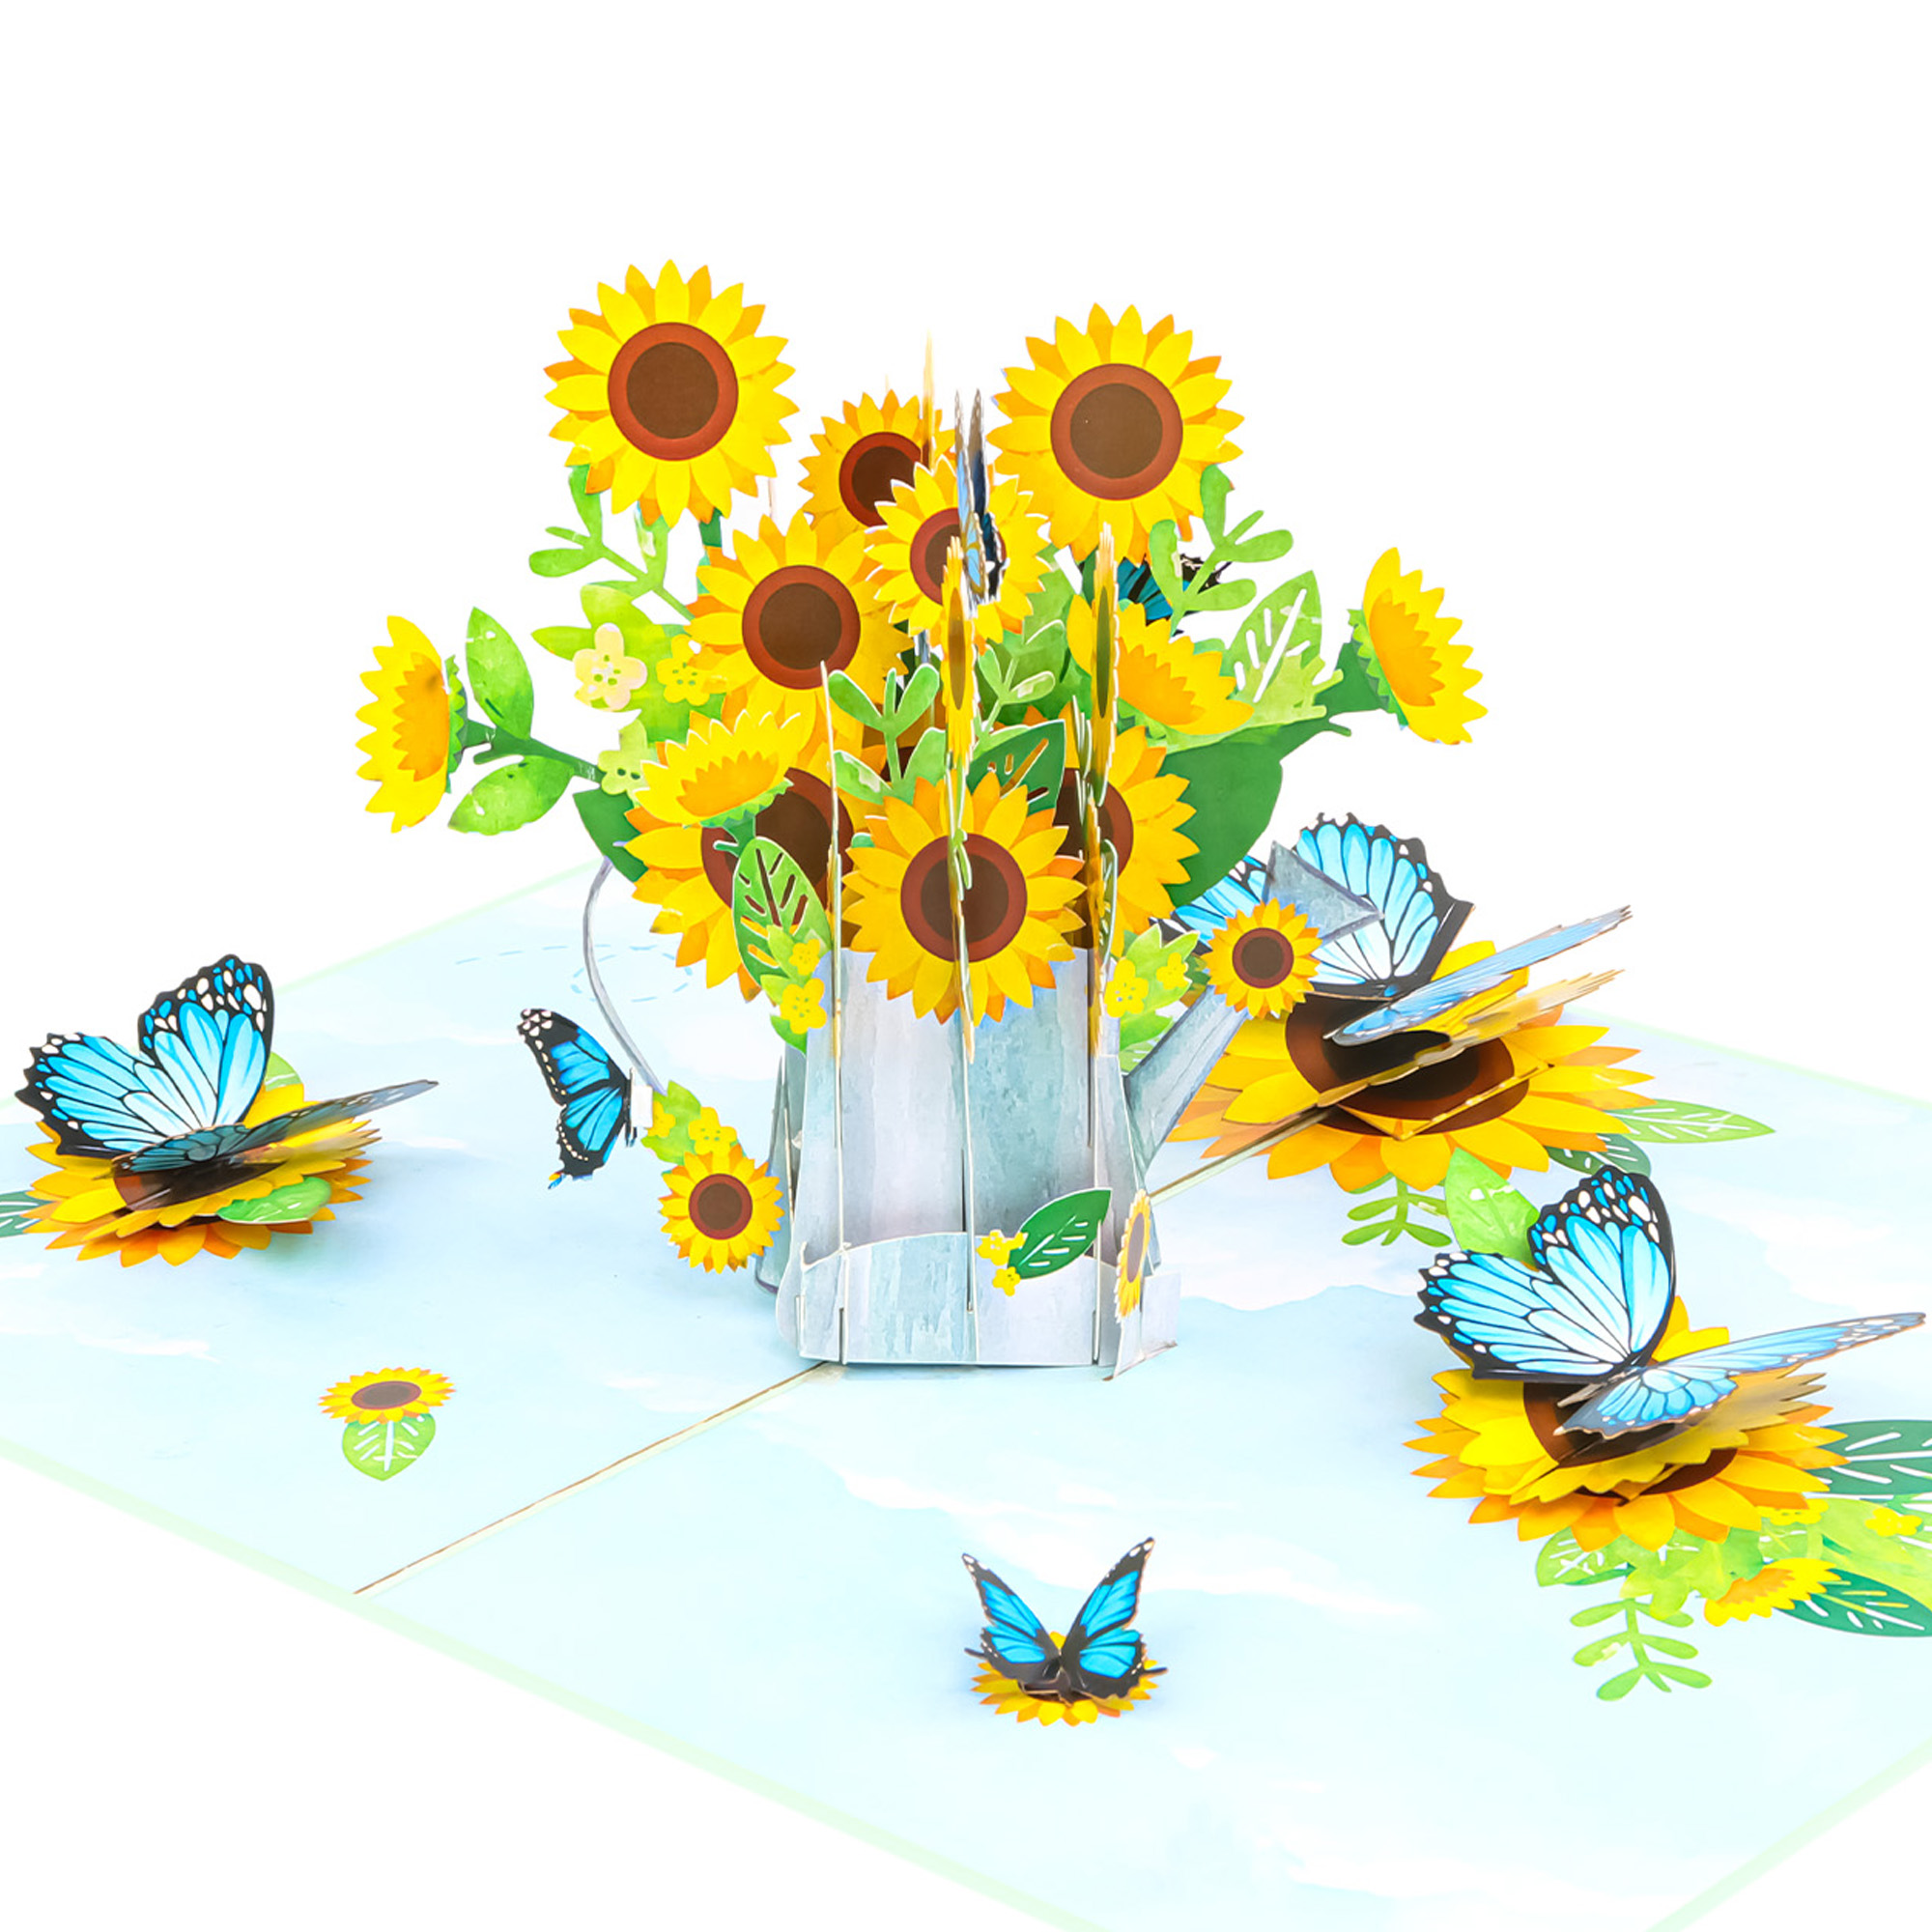 Watering-Can-Sunflower-Bouquet-Pop-Up-Card-FL093-detail-wholesale-manufacture-custom-design-custom-custom-pop-up-birthday-card-just-because-pop-up-card